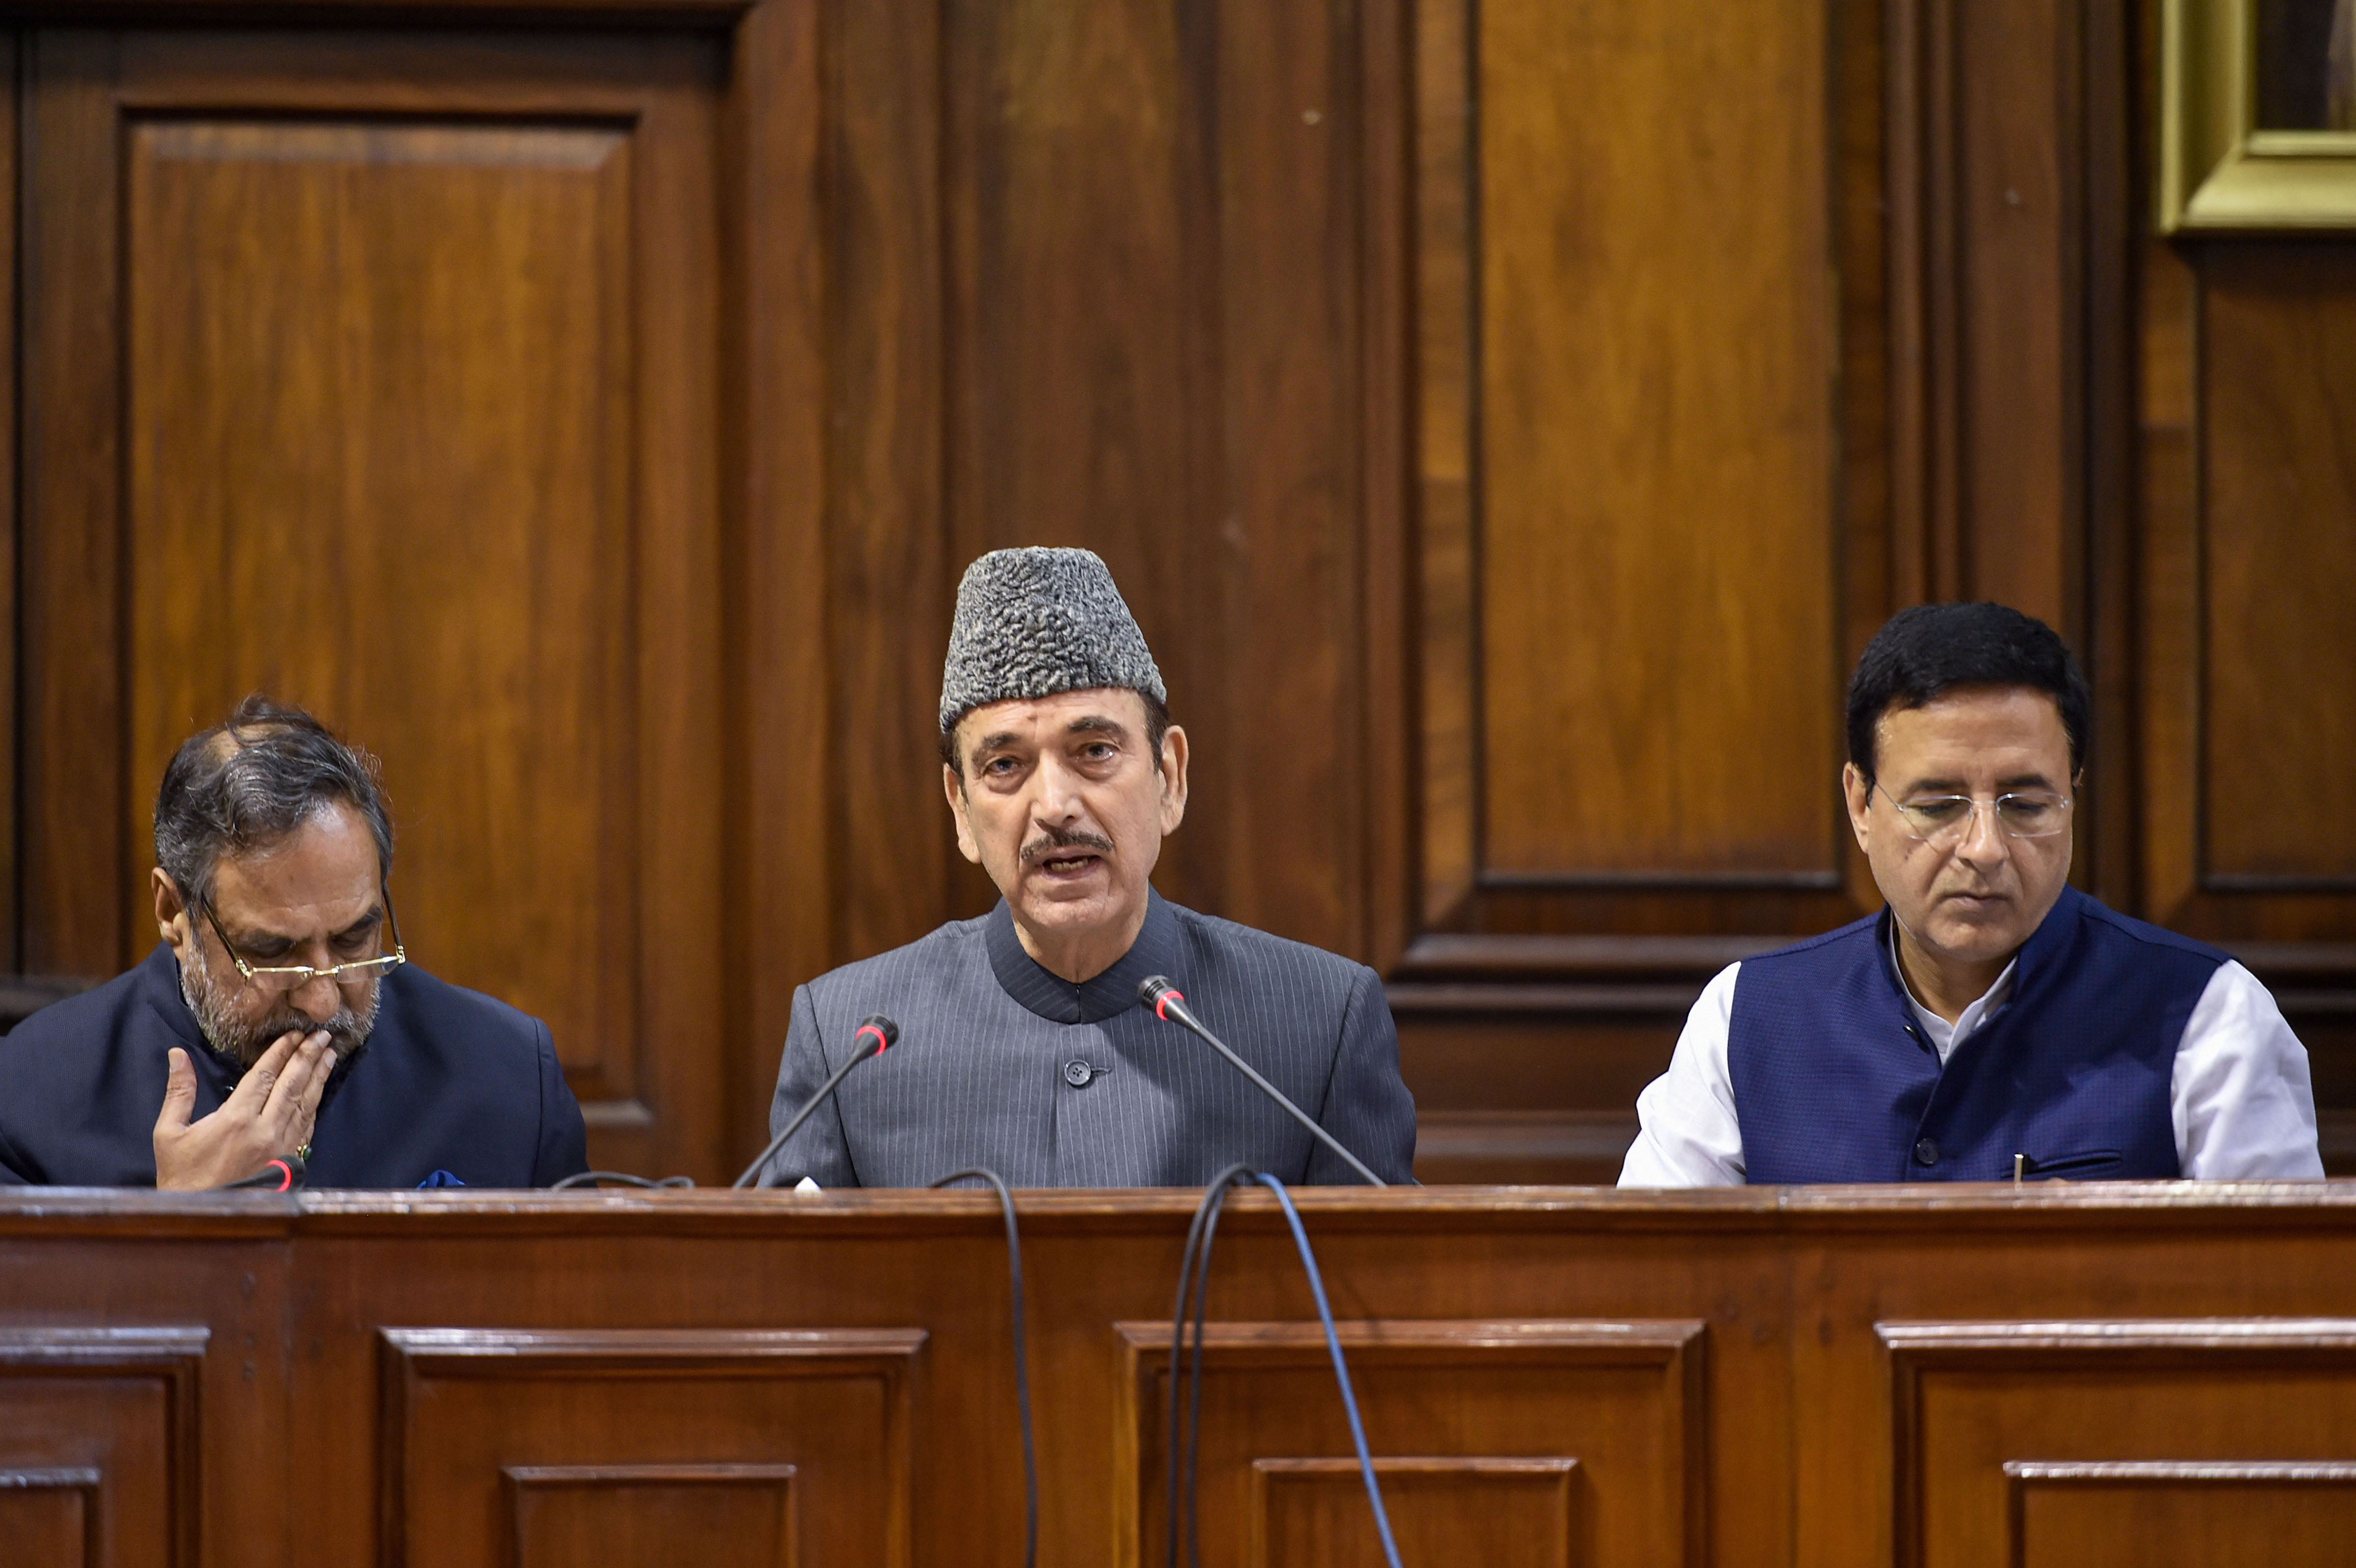 Senior Congress leaders Ghulam Nabi Azad, Anand Sharma and Randeep Surjewala address the media at Parliament House during the ongoing Winter Session - PTI